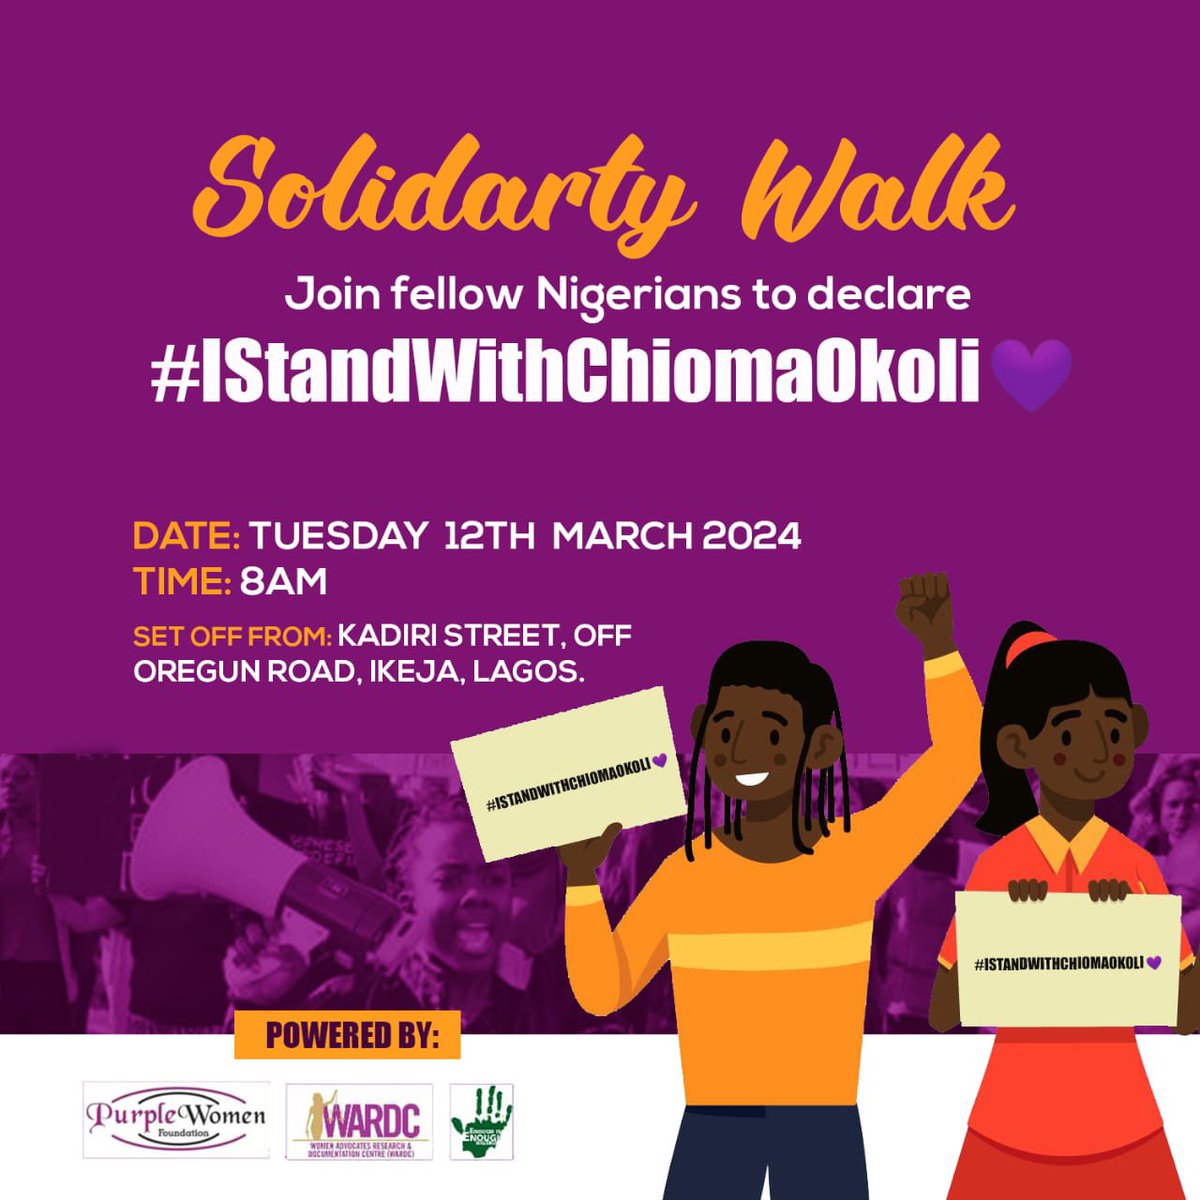 Join us as we take on a solidarity work #istandwithchiomaokoli in Lagos State! As a human rights organization, we believe that consumers have a right to review the products they buy without fear of bullying or harassment.